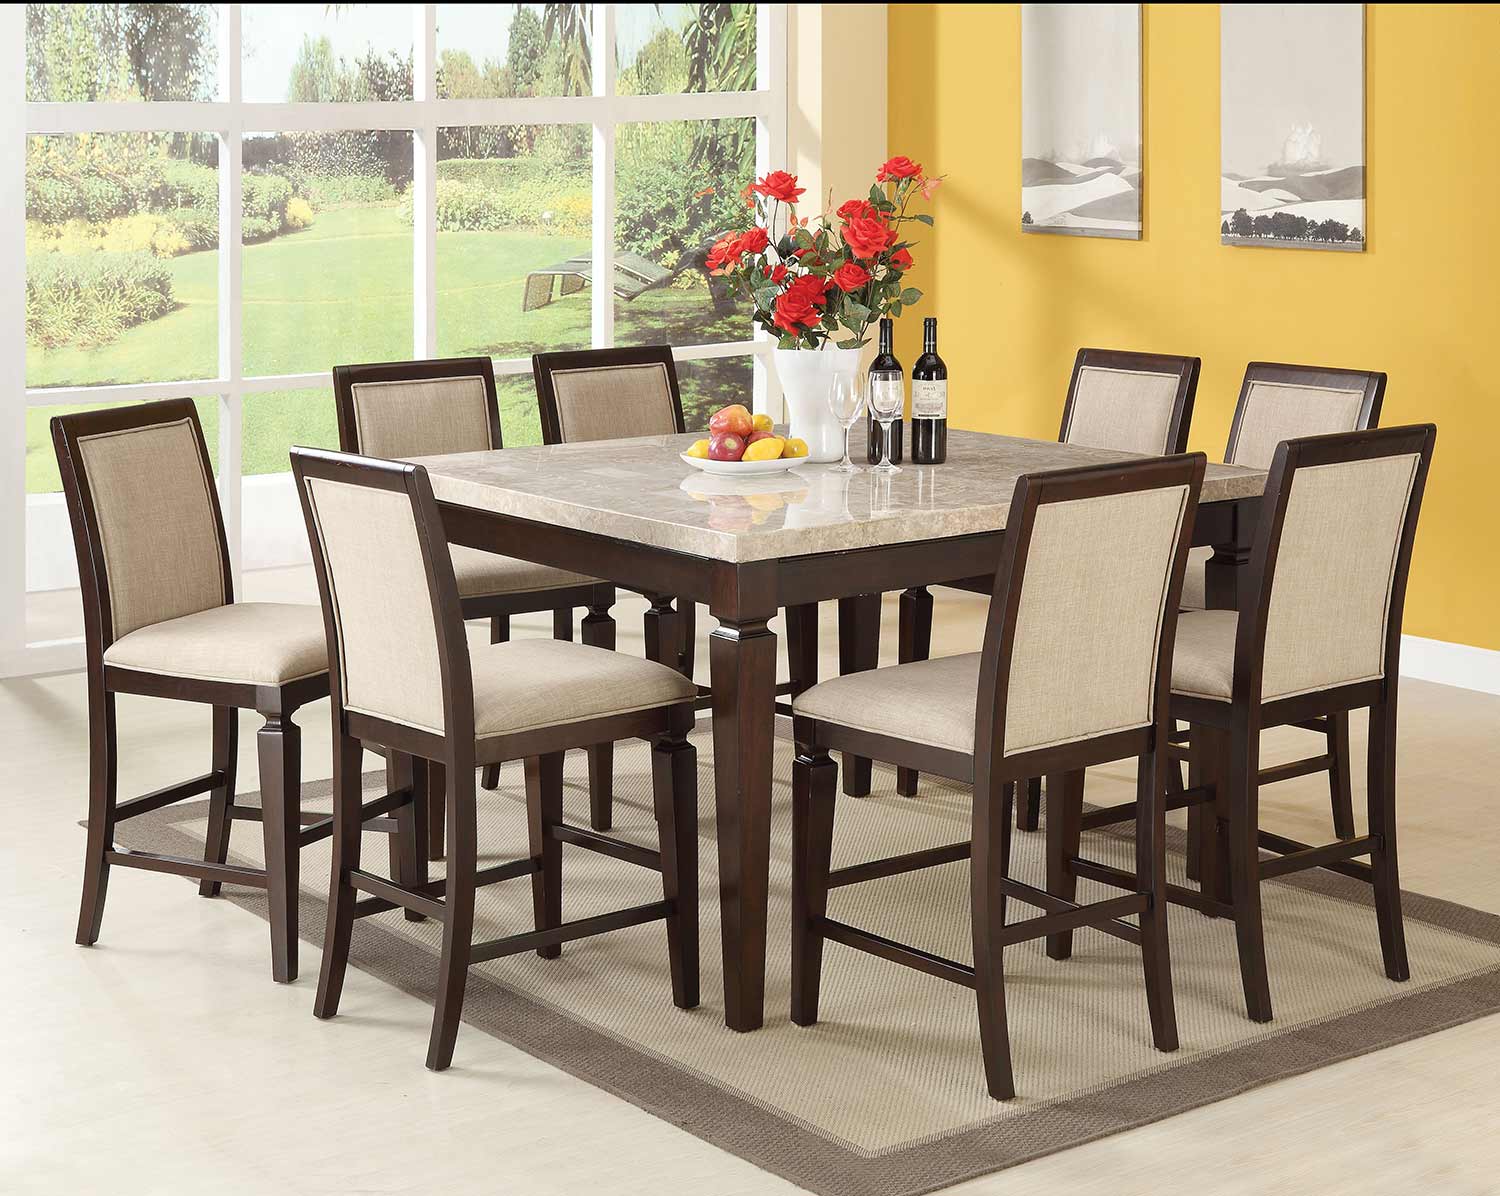 Acme Agatha Counter Height Dining Set - White Marble/Espresso